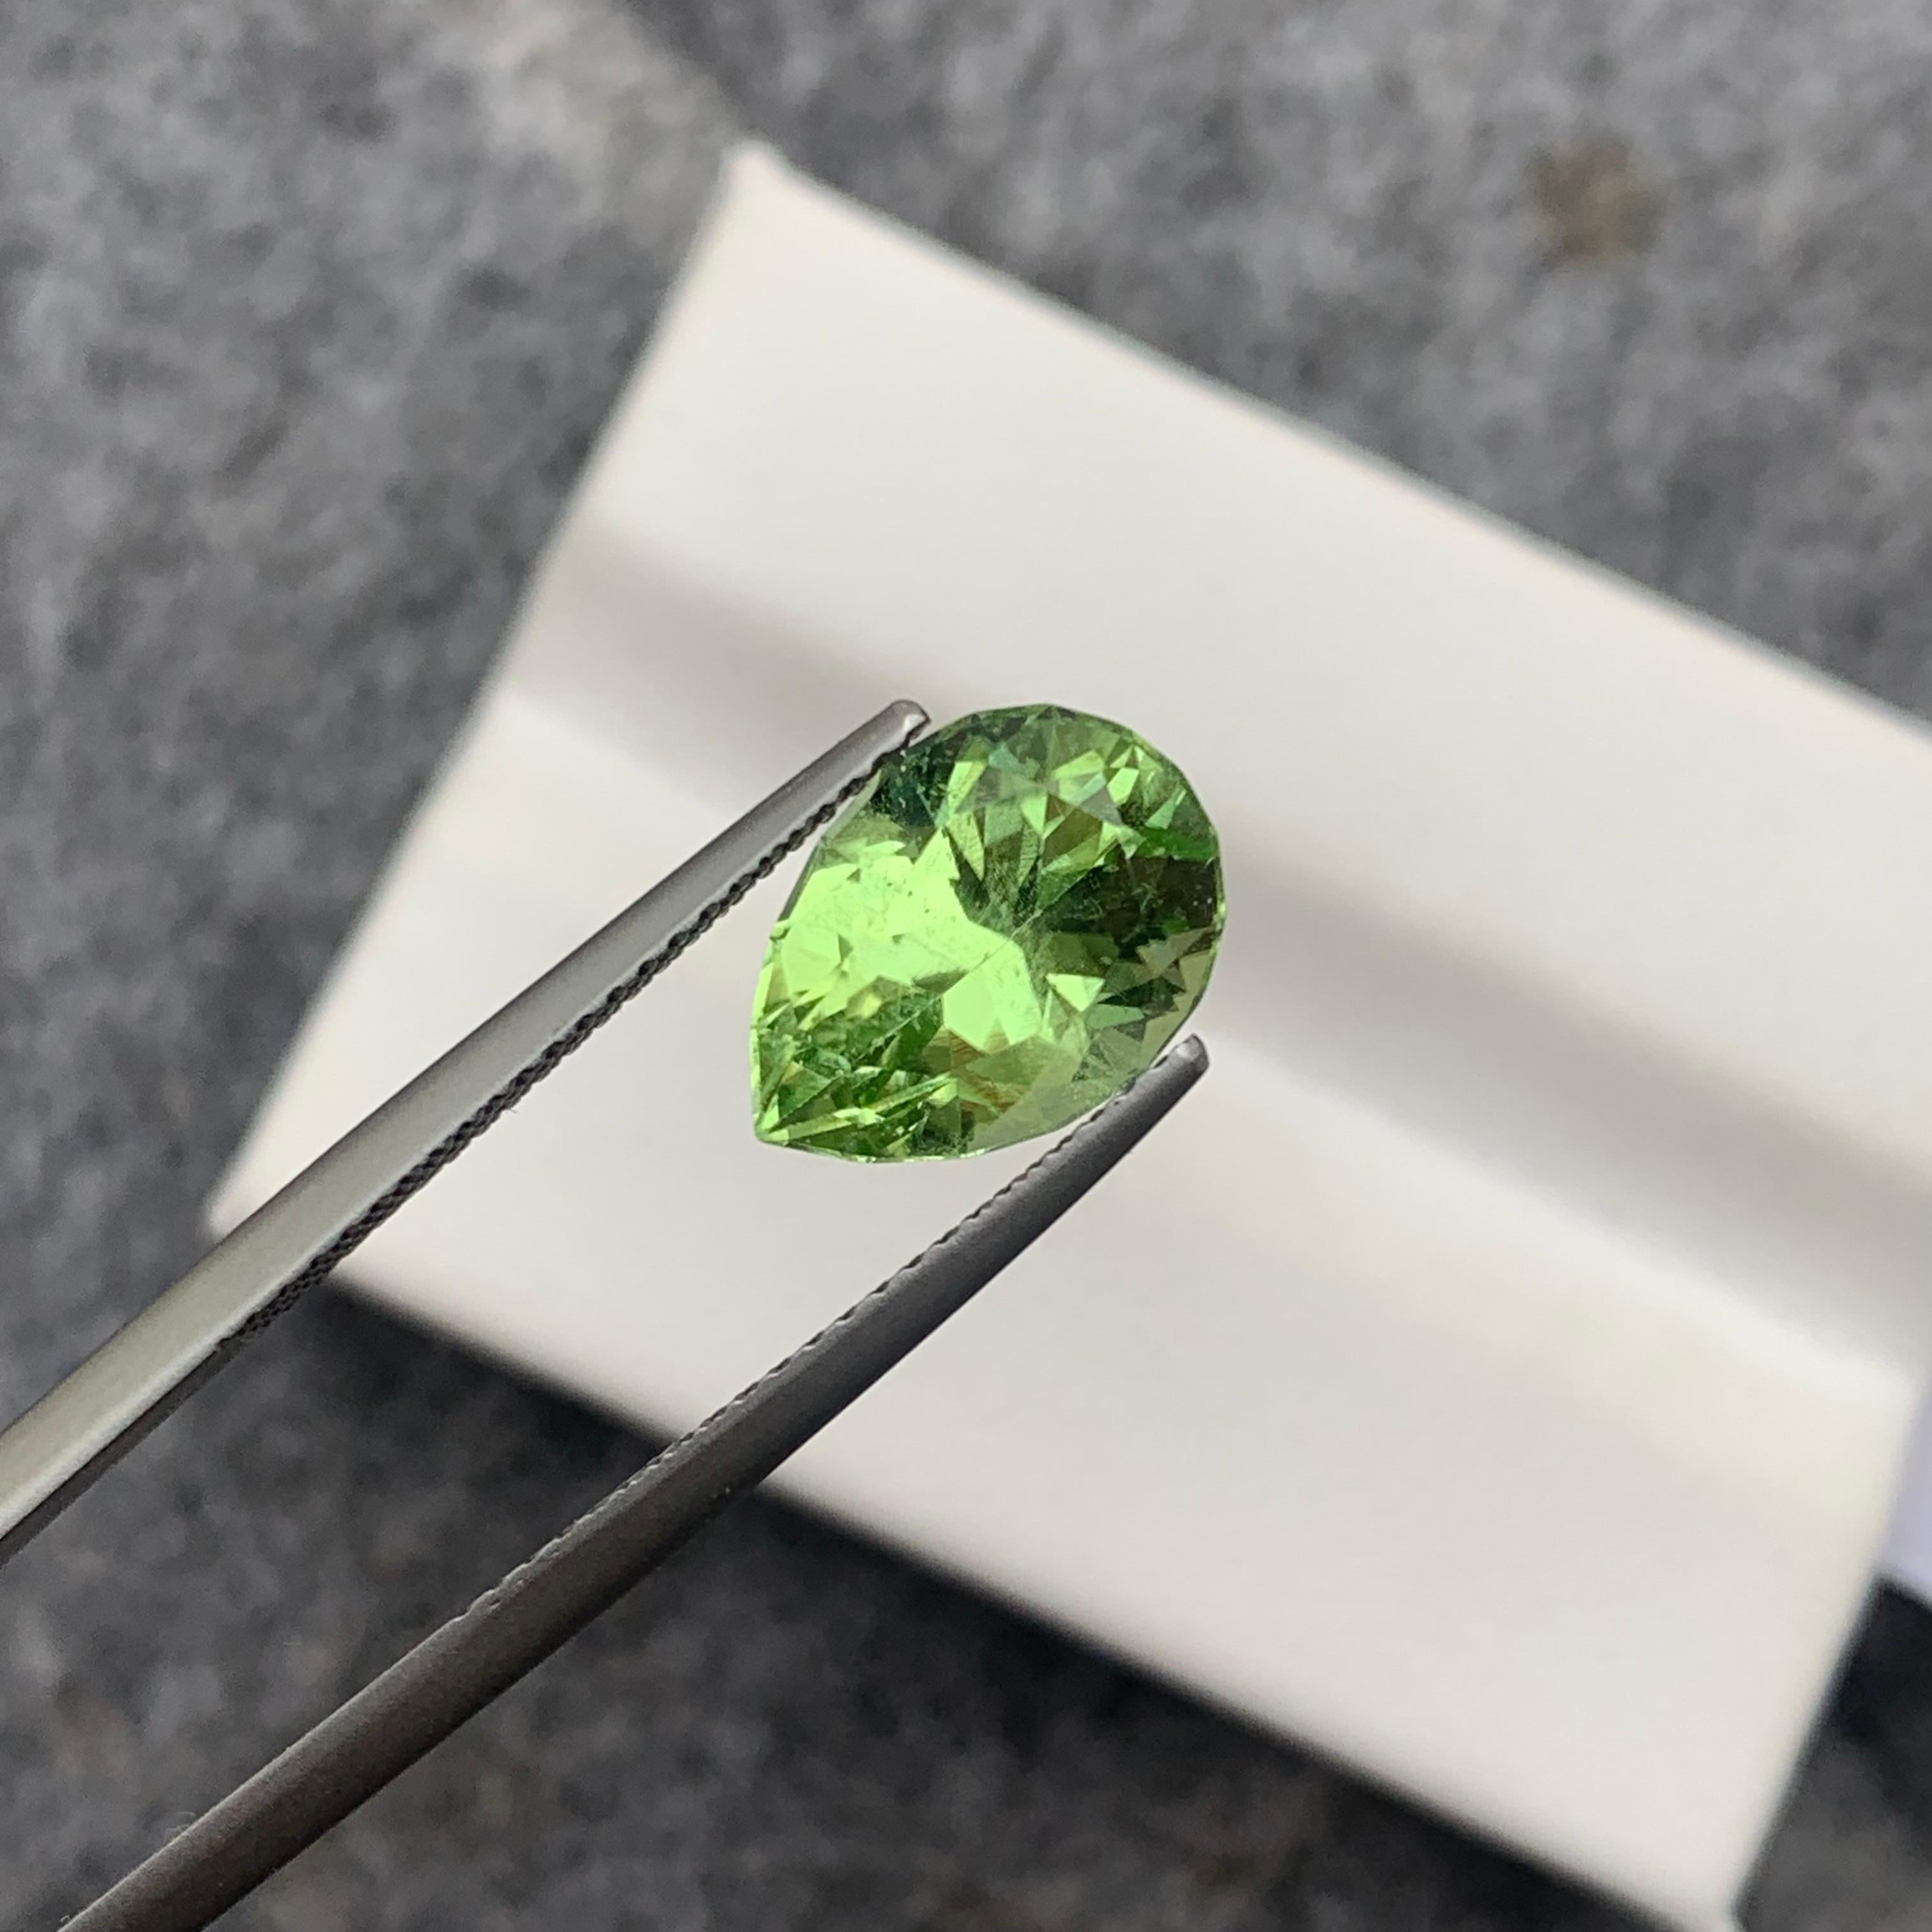 Gemstone Type : Peridot
Weight : 3.50 Carats
Dimensions : 11.3x8.2x6.3 Mm
Origin : Suppat Valley Pakistan
Clarity : SI
Certificate: On Demand
Color: Green
Treatment: Non
Shape: Pear / Tear
It helps cure diseases related to lungs, breasts, intestinal